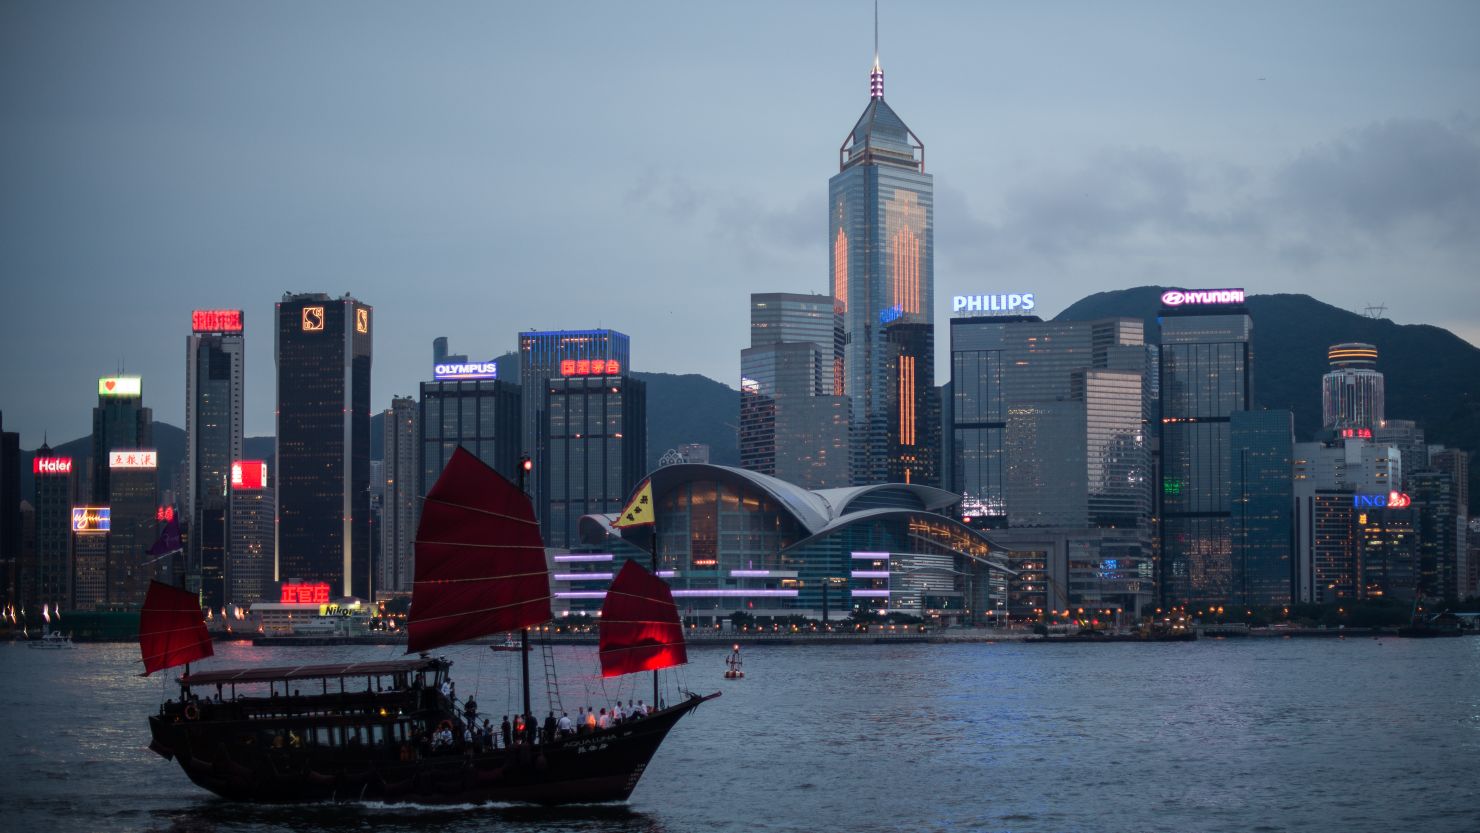 The Hong-Kong-based Universal Credit Rating Group wants to reform the global credit rating regime.